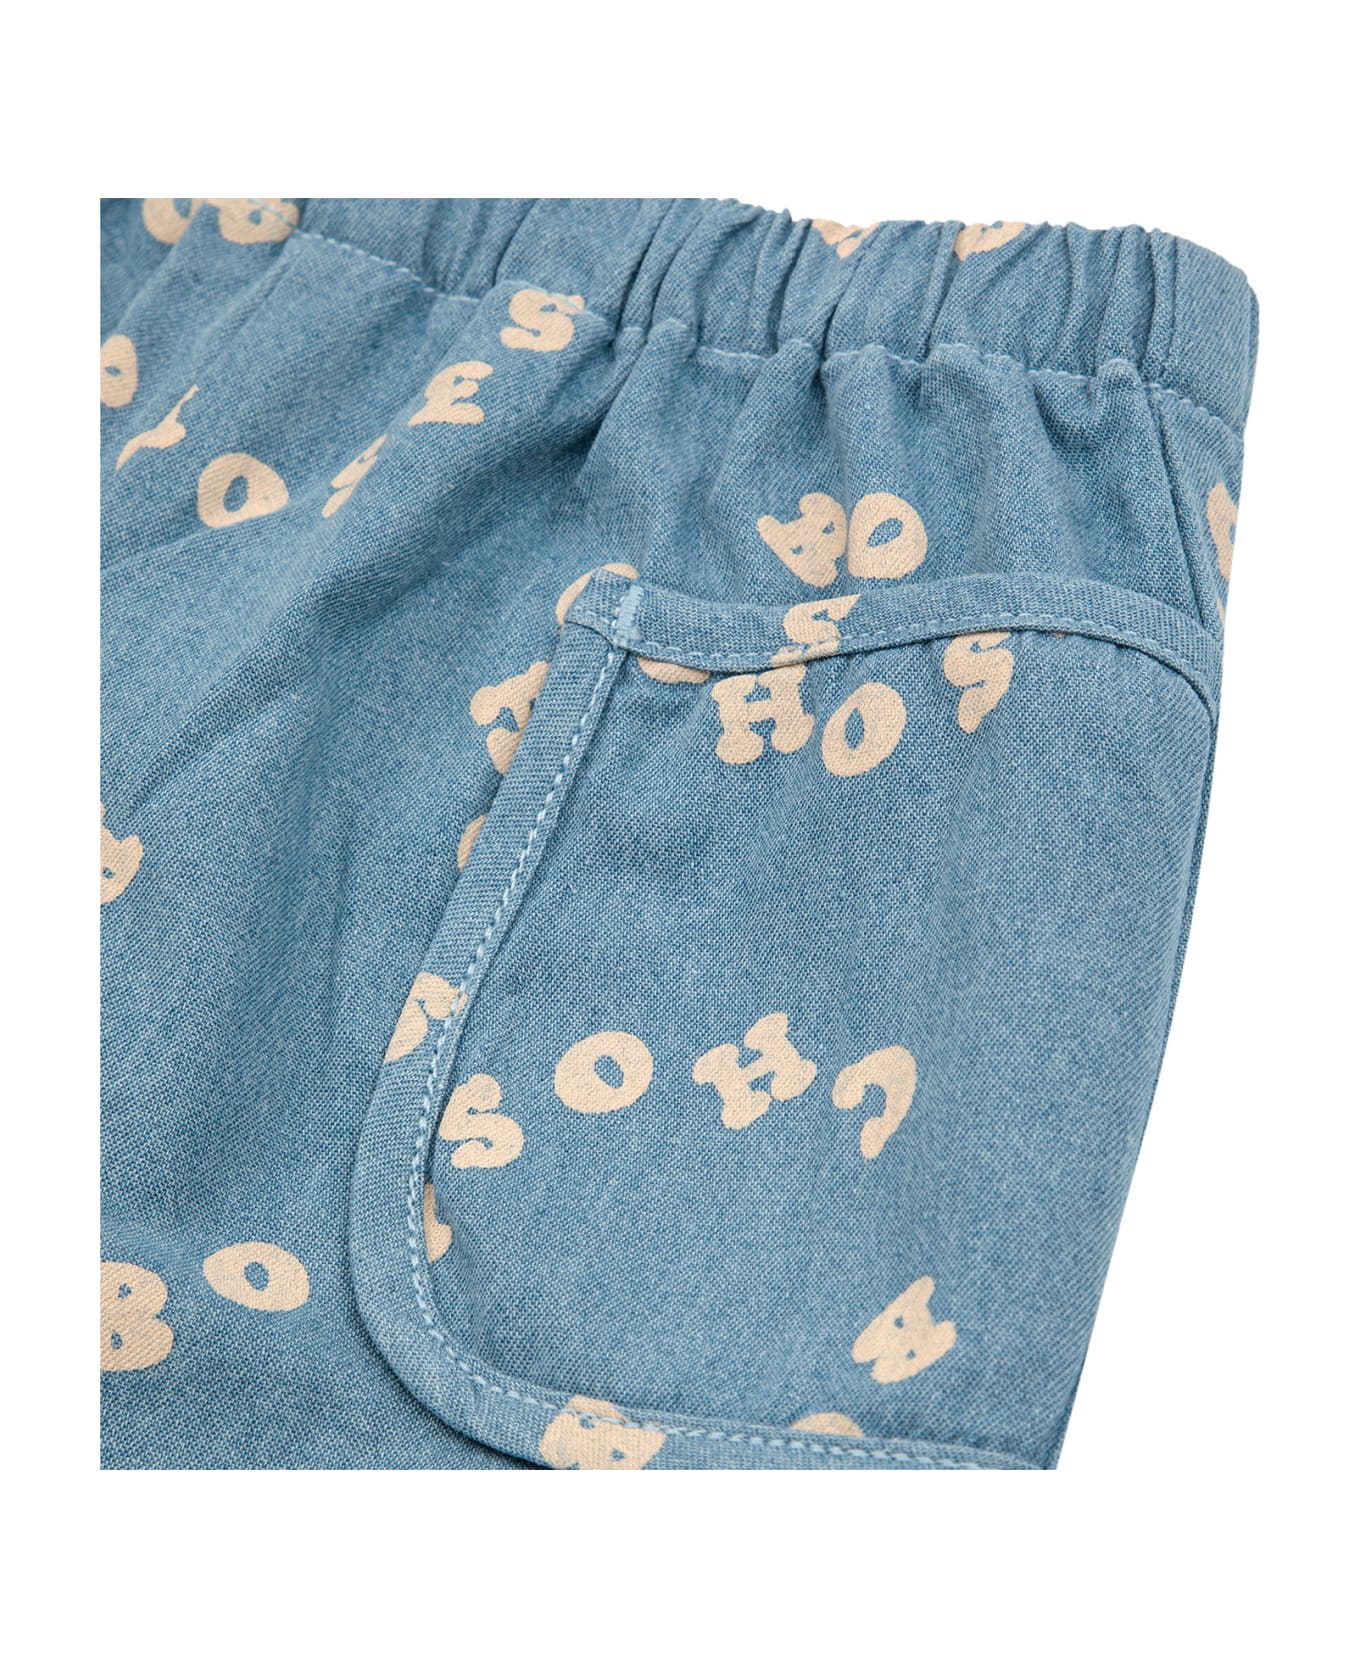 Bobo Choses Denim Jeans For Babies With All-over Circle Logo - Denim